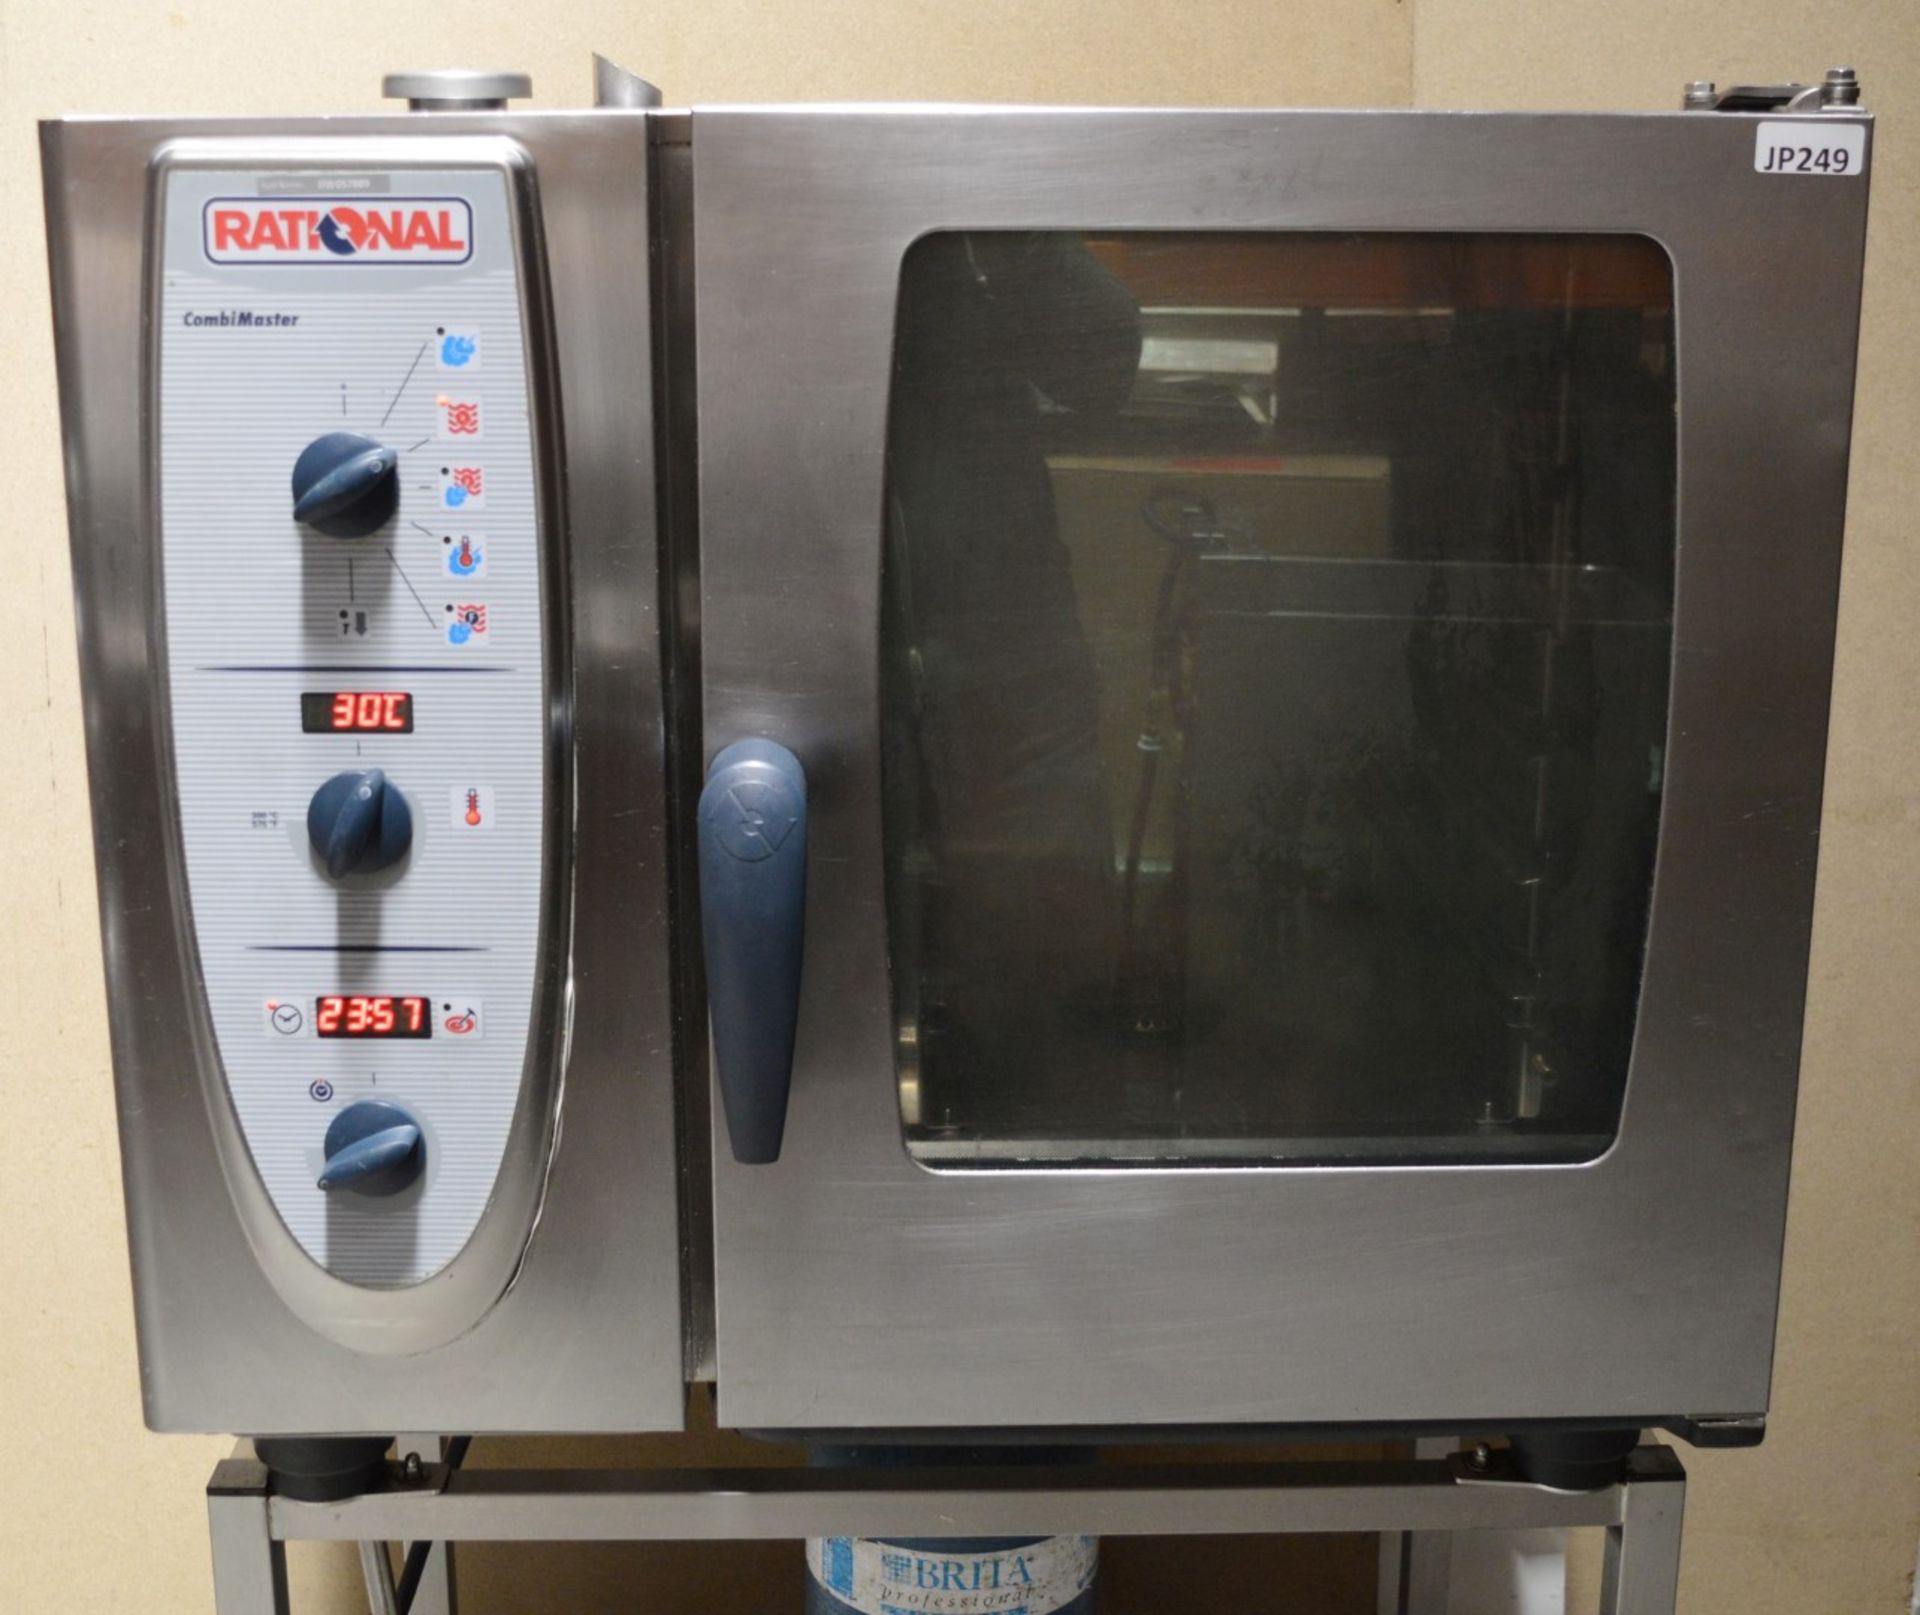 1 x Rational CombiMaster 6 Grid Combi Oven With Stand - CL232 - 3 Phase - H146x W85 x D82 cms - - Image 5 of 11